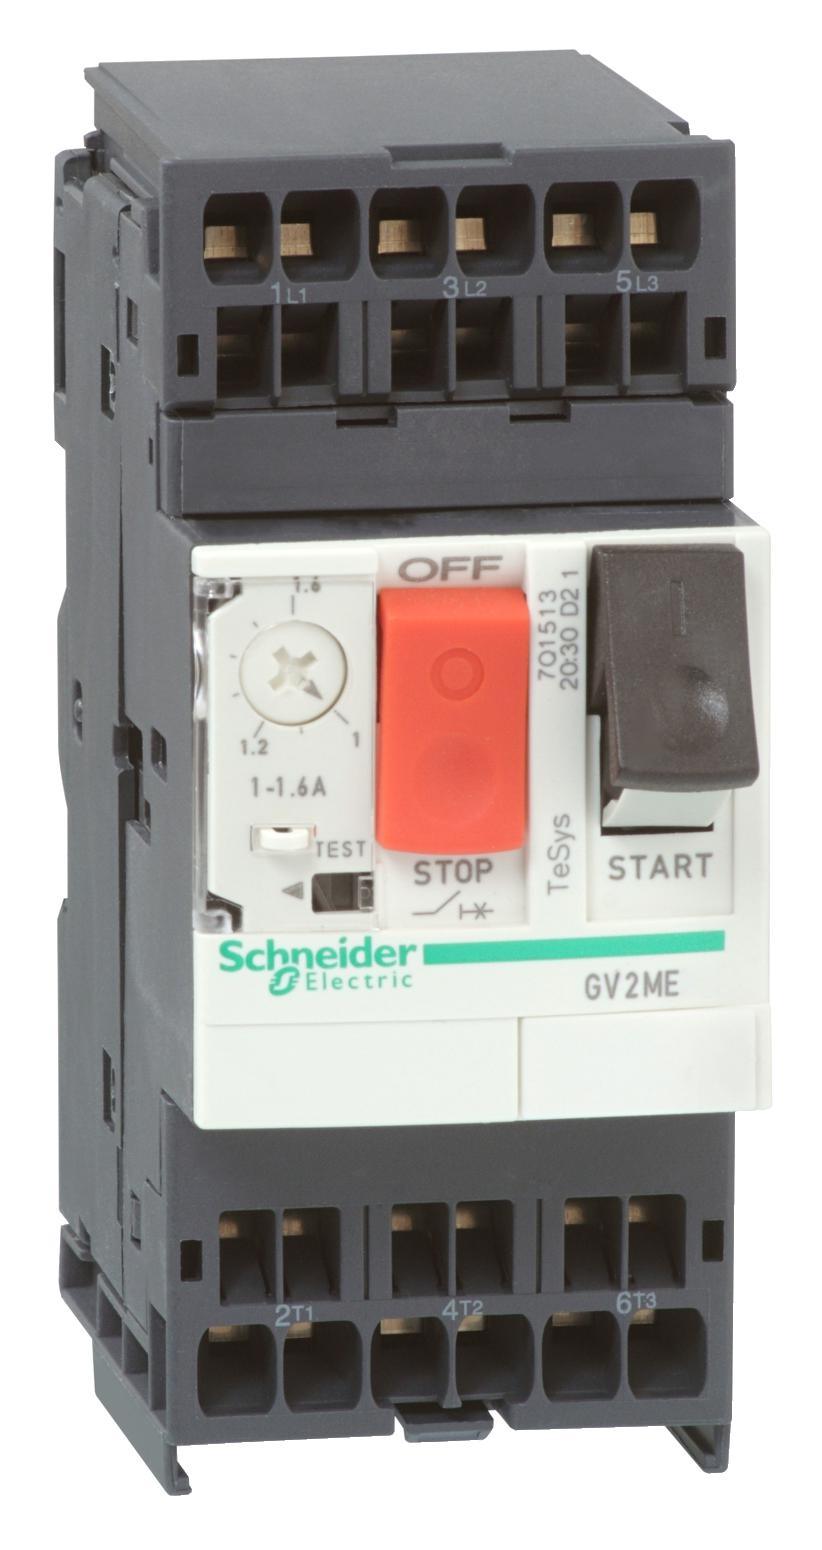 GV2ME013 THERMAL MAGNETIC CIRCUIT BREAKER SCHNEIDER ELECTRIC